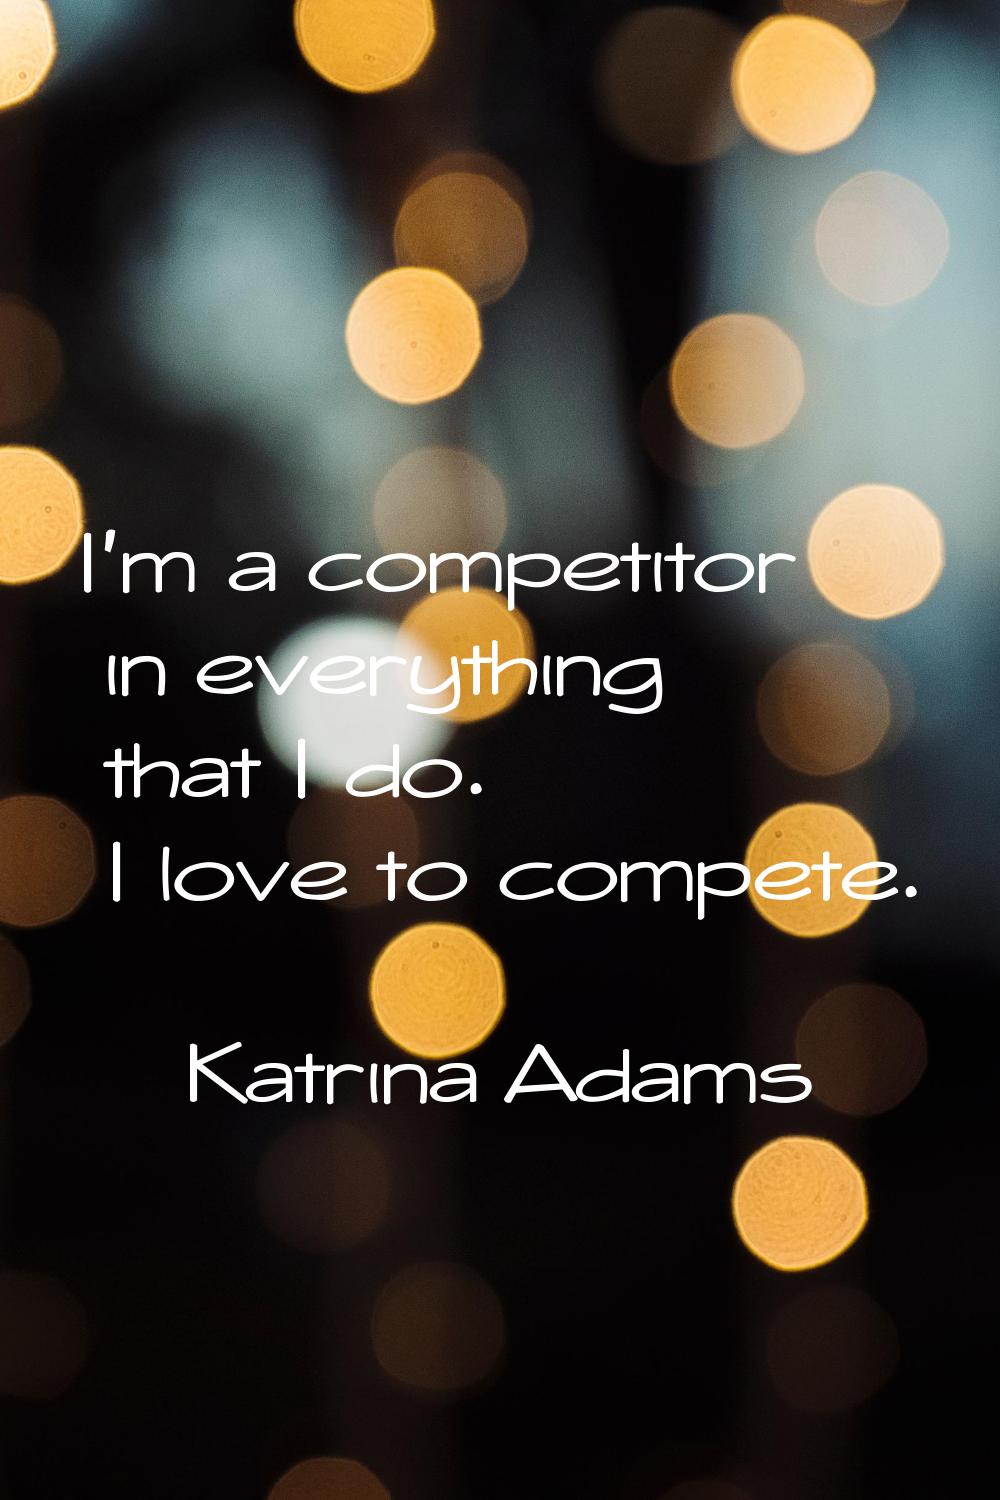 I'm a competitor in everything that I do. I love to compete.